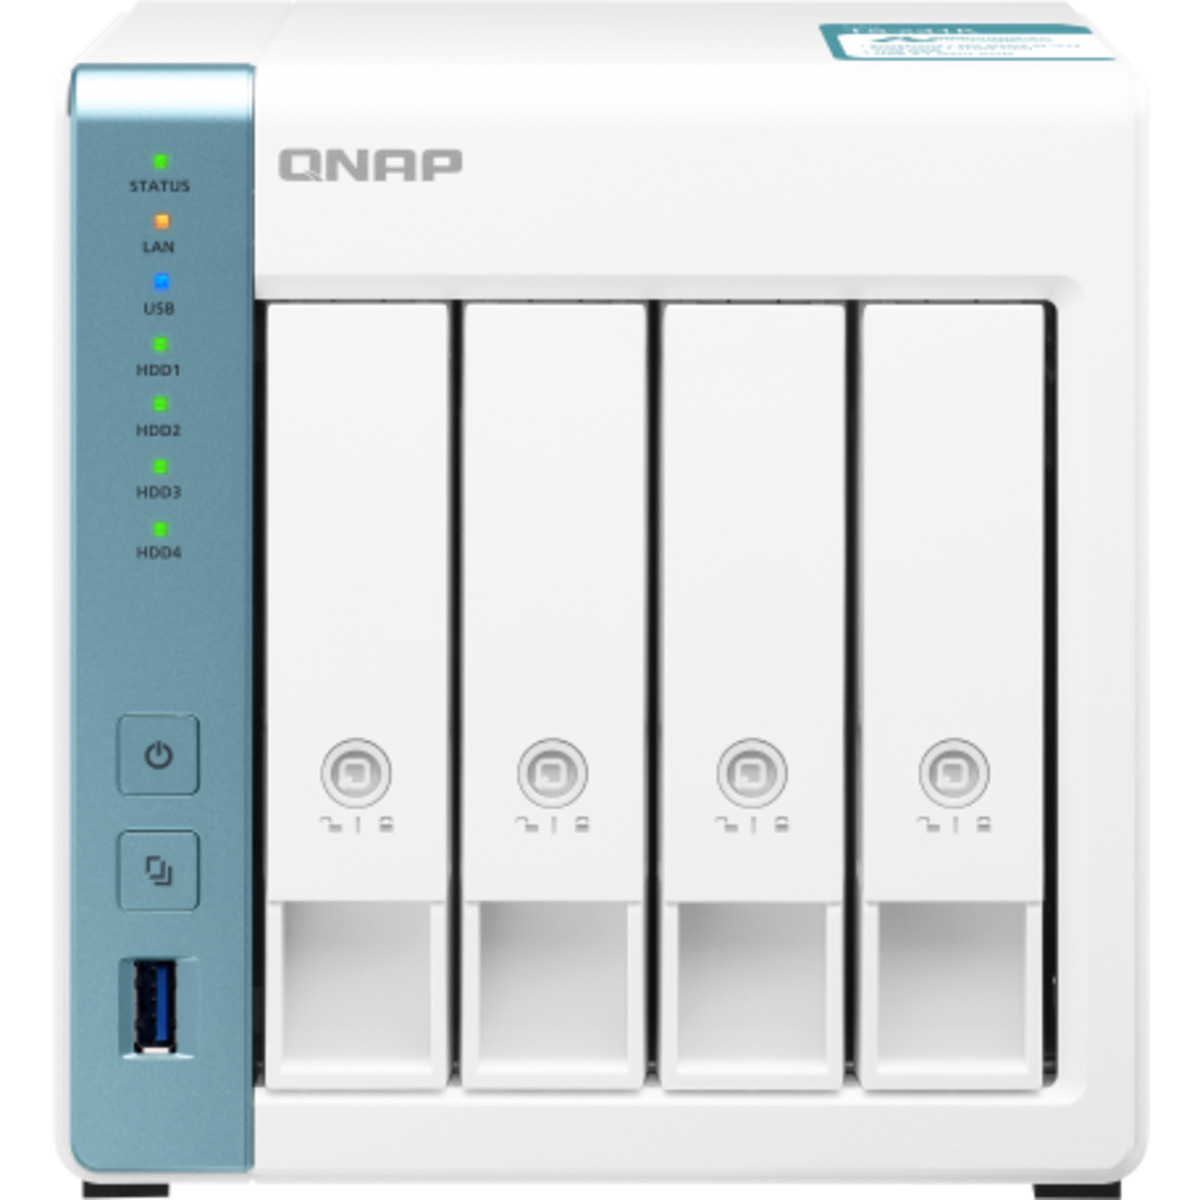 QNAP TS-431K 16tb 4-Bay Desktop Personal / Basic Home / Small Office NAS - Network Attached Storage Device 4x4tb Seagate IronWolf ST4000VN006 3.5 5400rpm SATA 6Gb/s HDD NAS Class Drives Installed - Burn-In Tested TS-431K